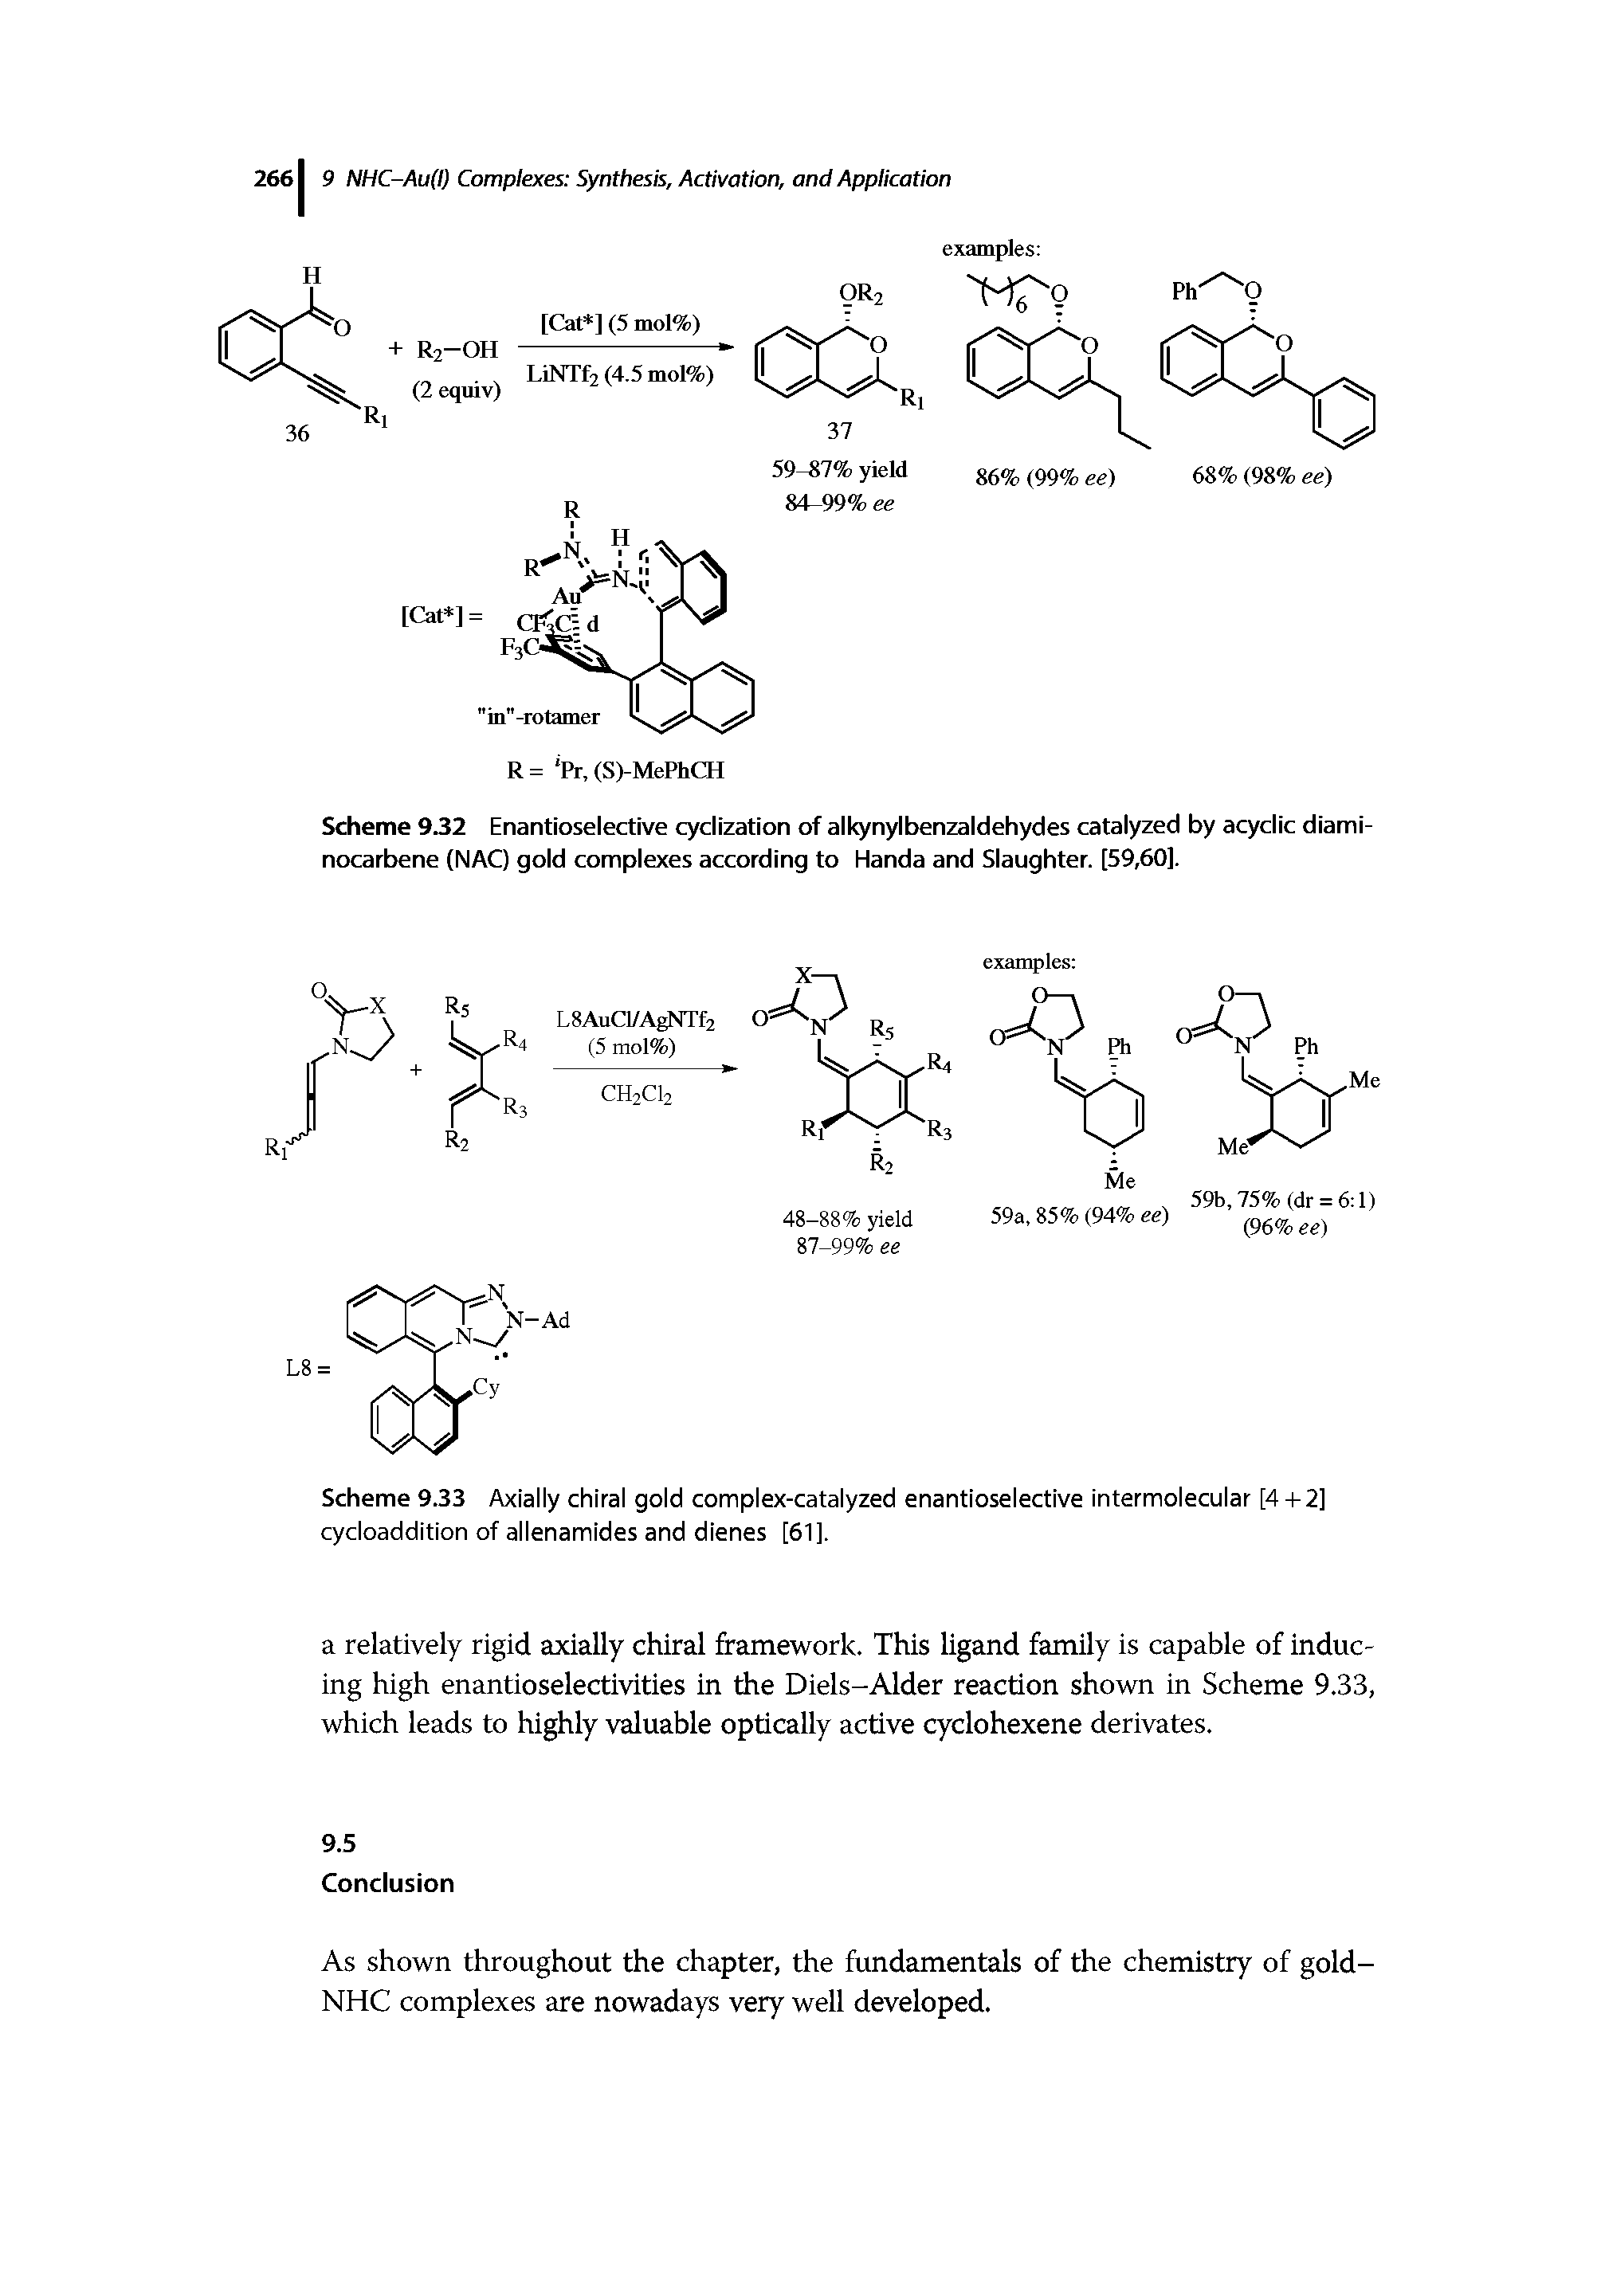 Scheme 933 Axially chiral gold complex-catalyzed enantioselective intermolecular [4-1-2] cycloaddition of allenamides and dienes [61].